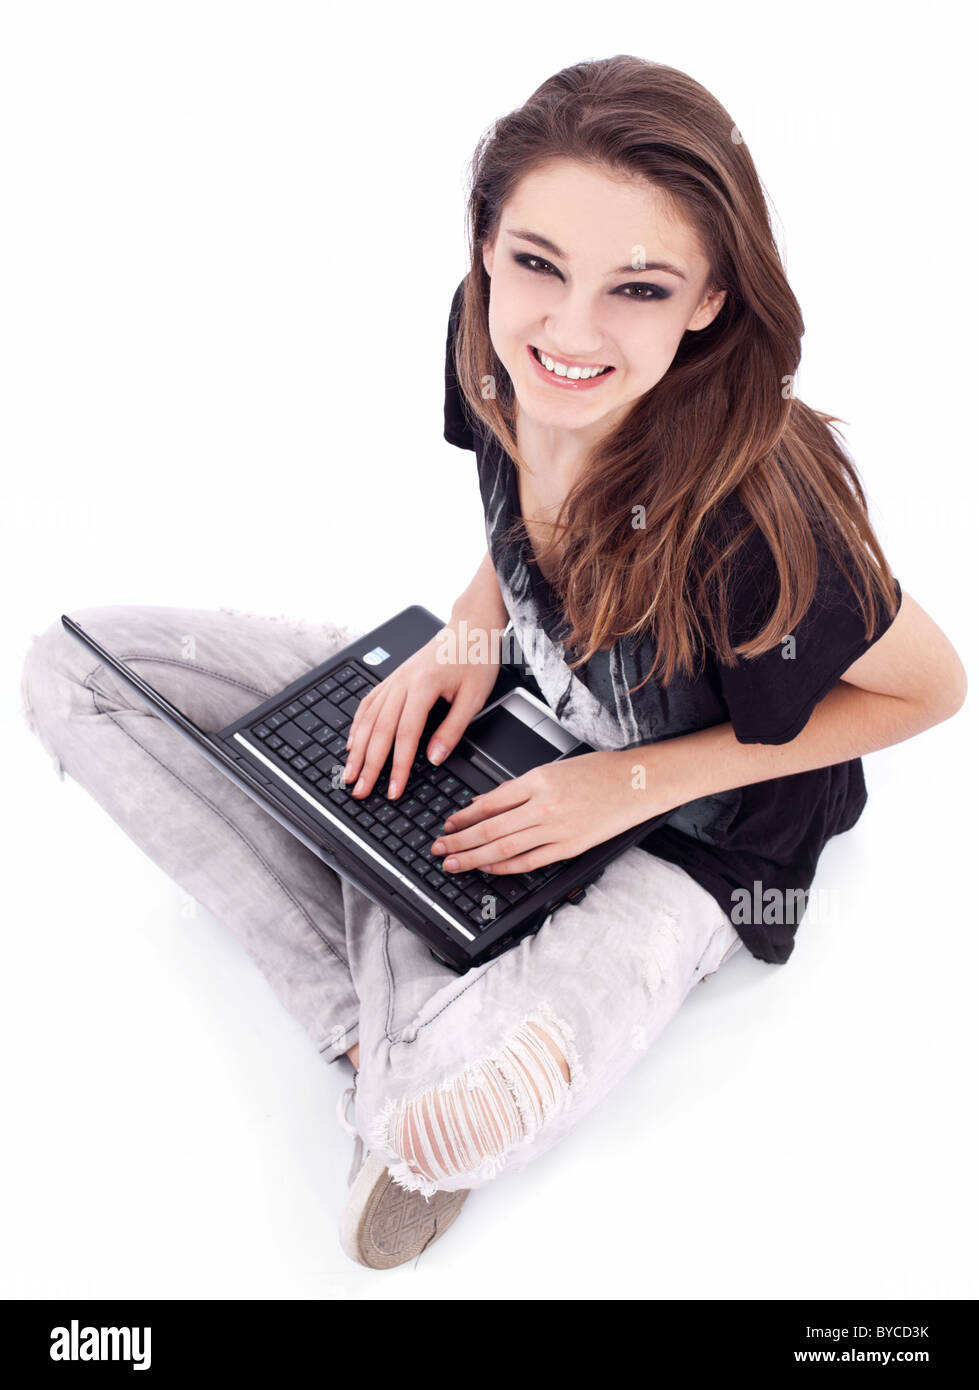 Girl working with laptop. Picture on a white background. Stock Photo